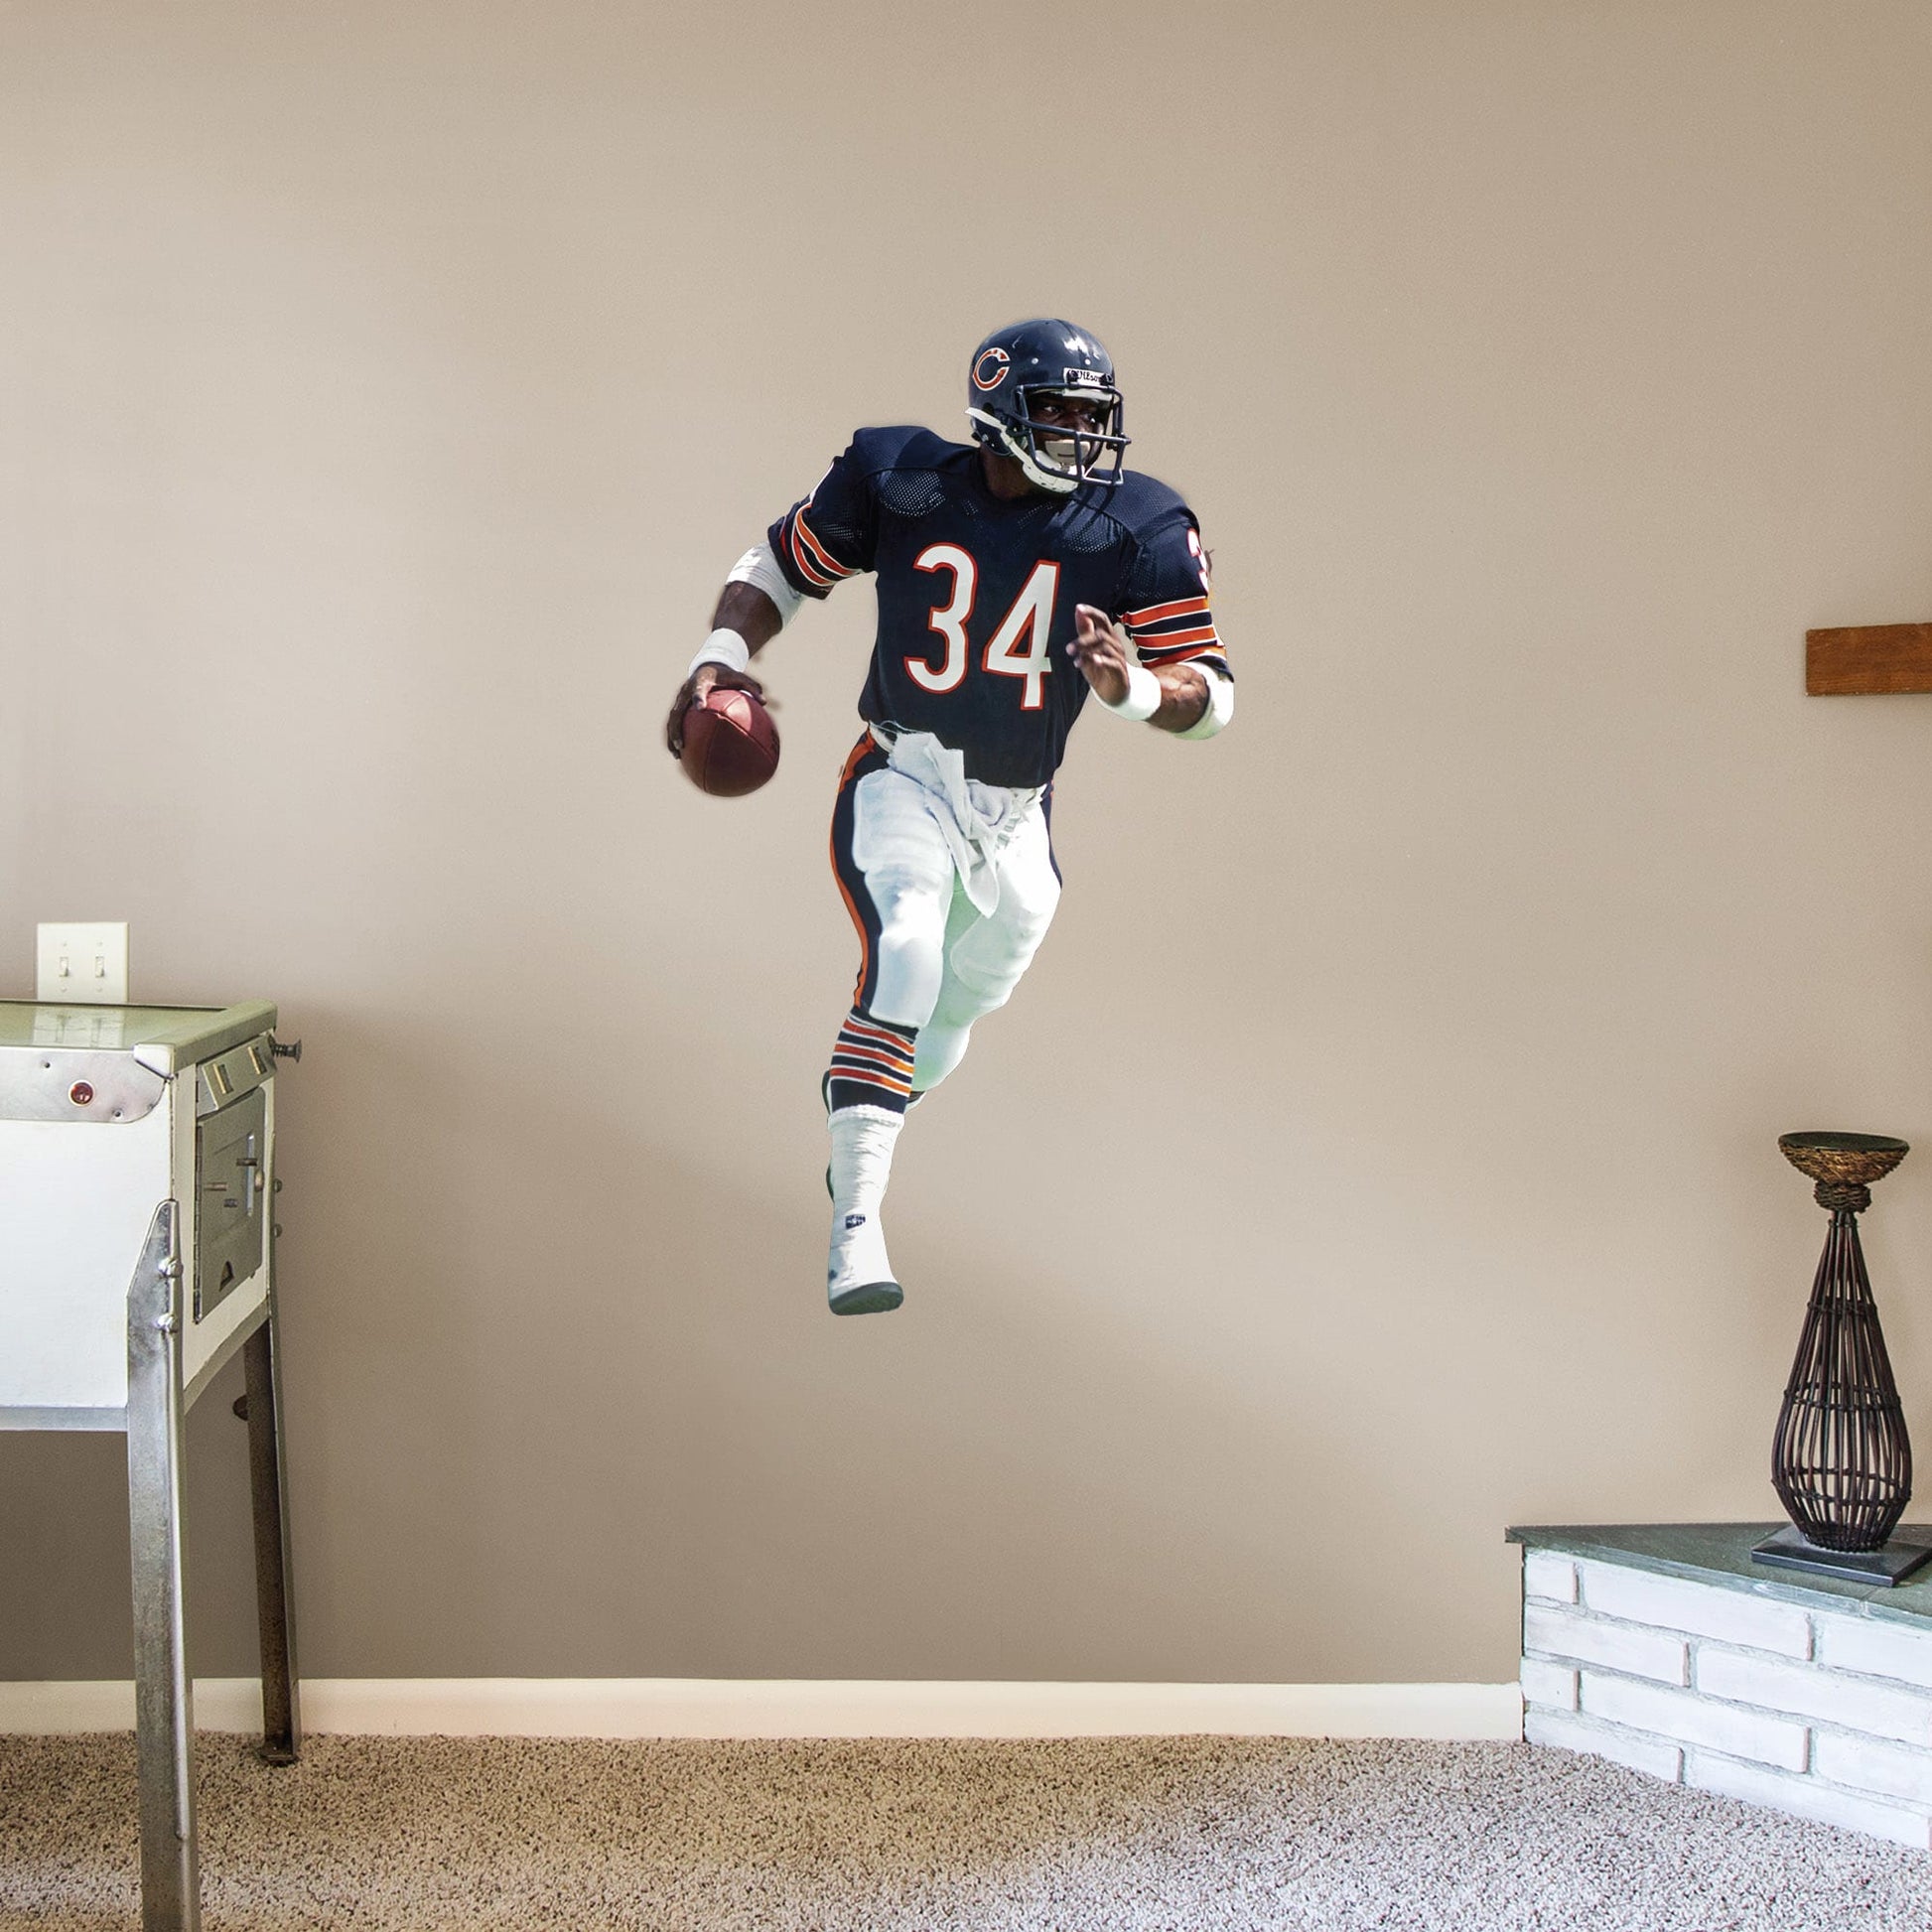 Giant Athlete + 2 Decals (29"W x 51"H) They called him Sweetness, a player whose heart was as big as his talent. A 9-time Pro Bowler and 1985 Super Bowl champion, Walter Payton widely is regarded as one of the greatest running backs of all time. Now fans of Da Bears can honor the late Hall of Famer with a removable wall decal set. Perfect for a bedroom or bonus room, the heavy-duty vinyl decals are easy to attach and remove. Bear down!